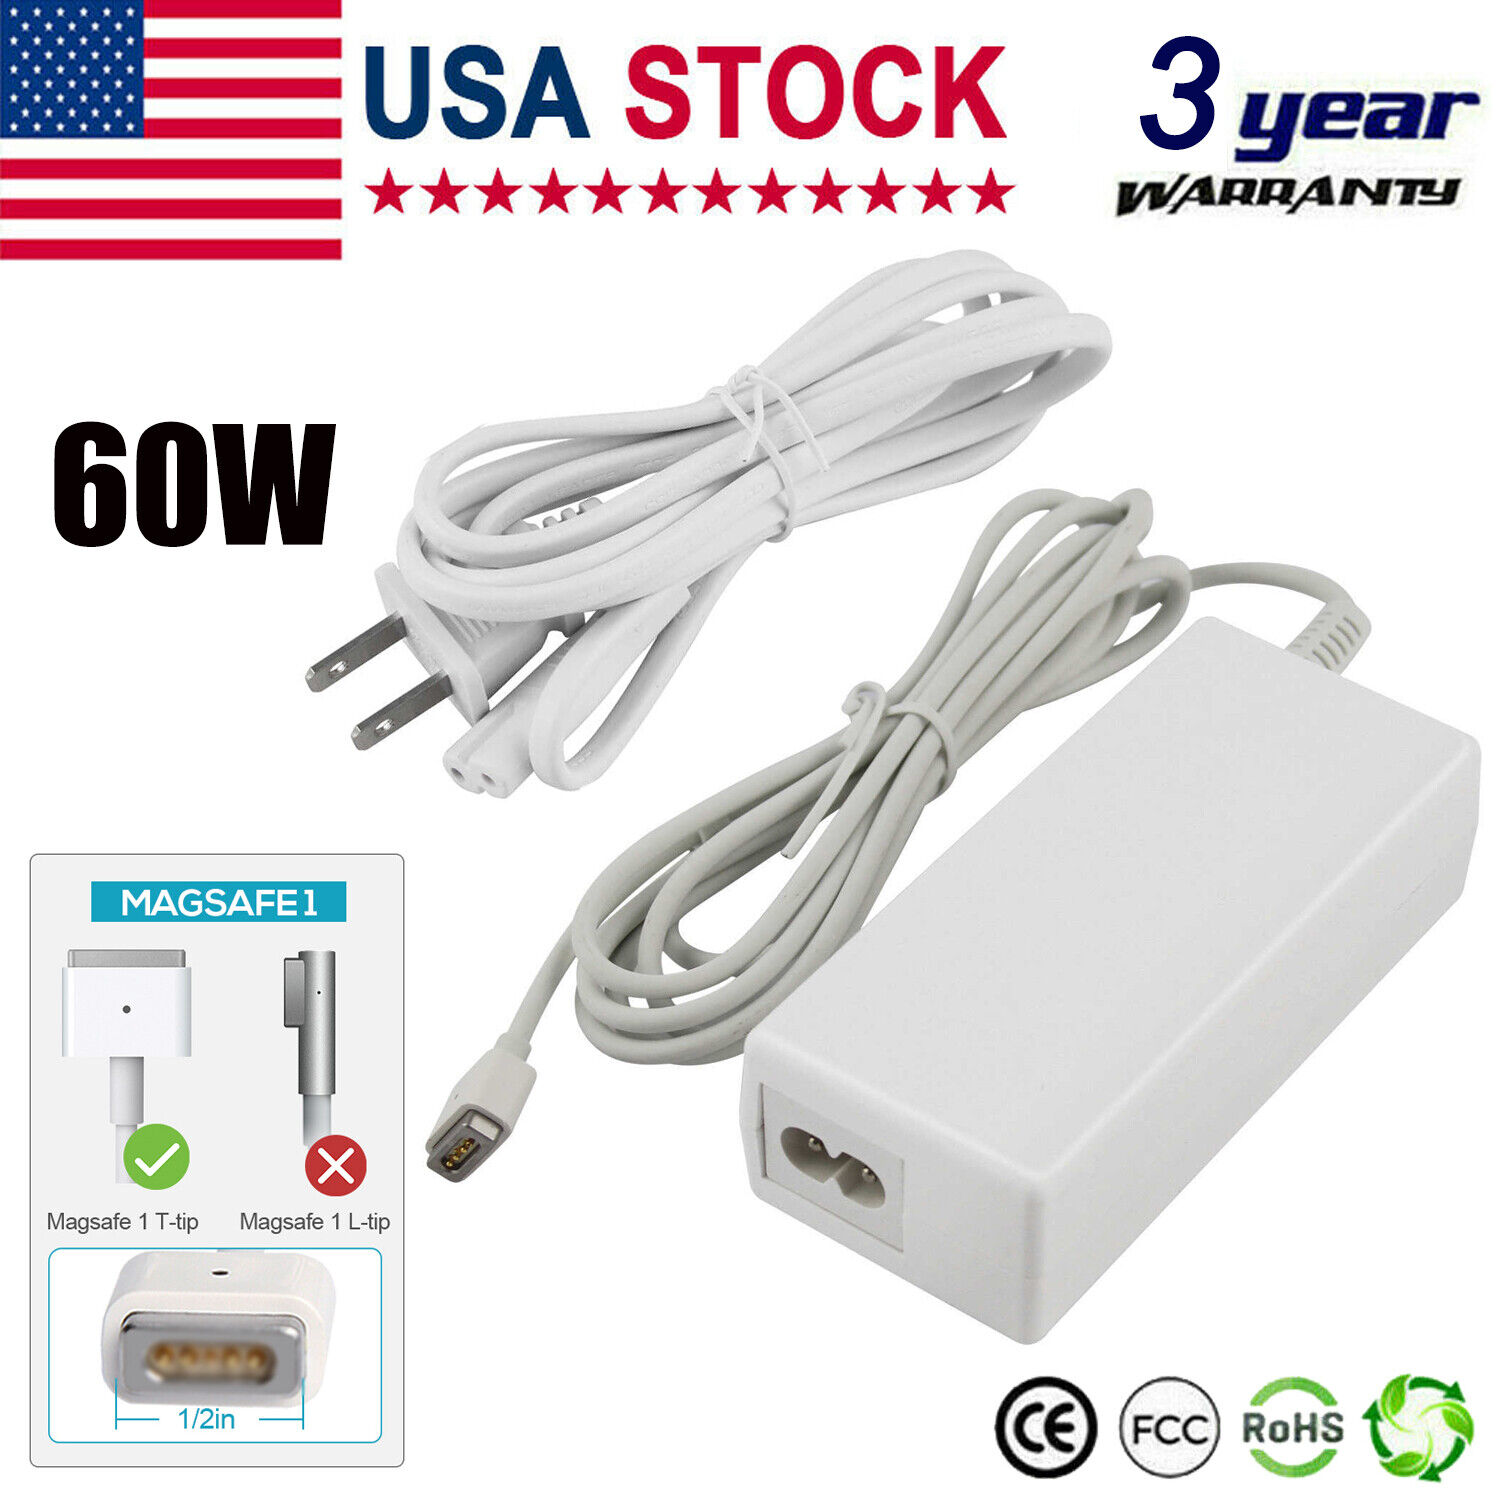 60W T-Tip Magnetic Charger Power Adapter Replace For Macbook Pro 13\